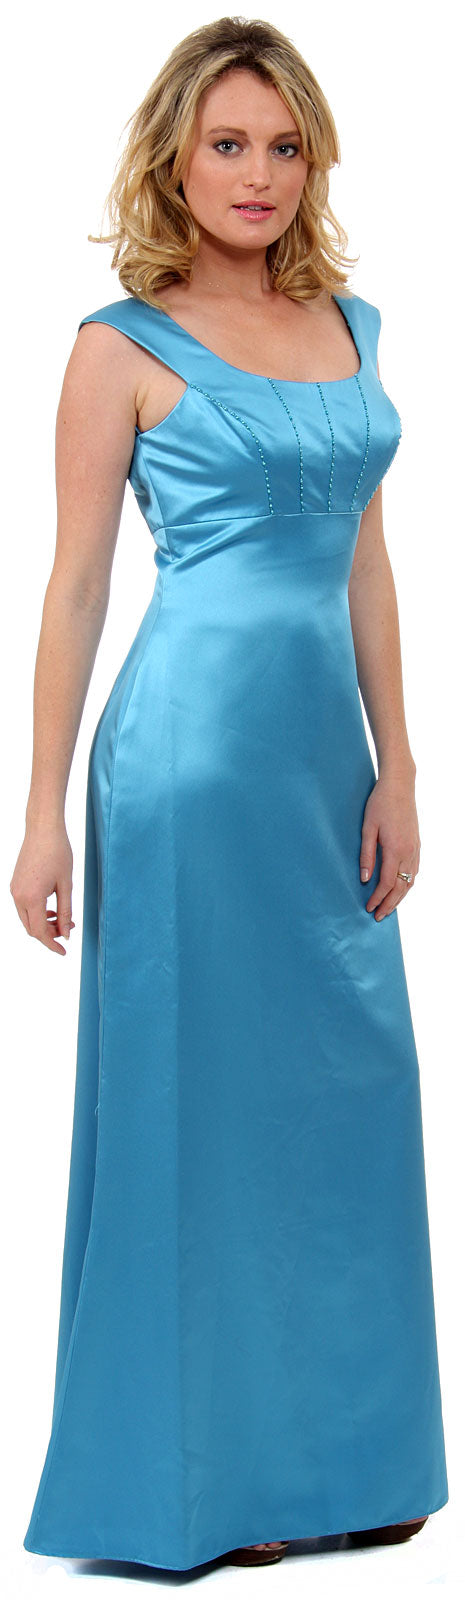 Image of Boat Neck Beaded Bridesmaid Dress in Carribean Blue